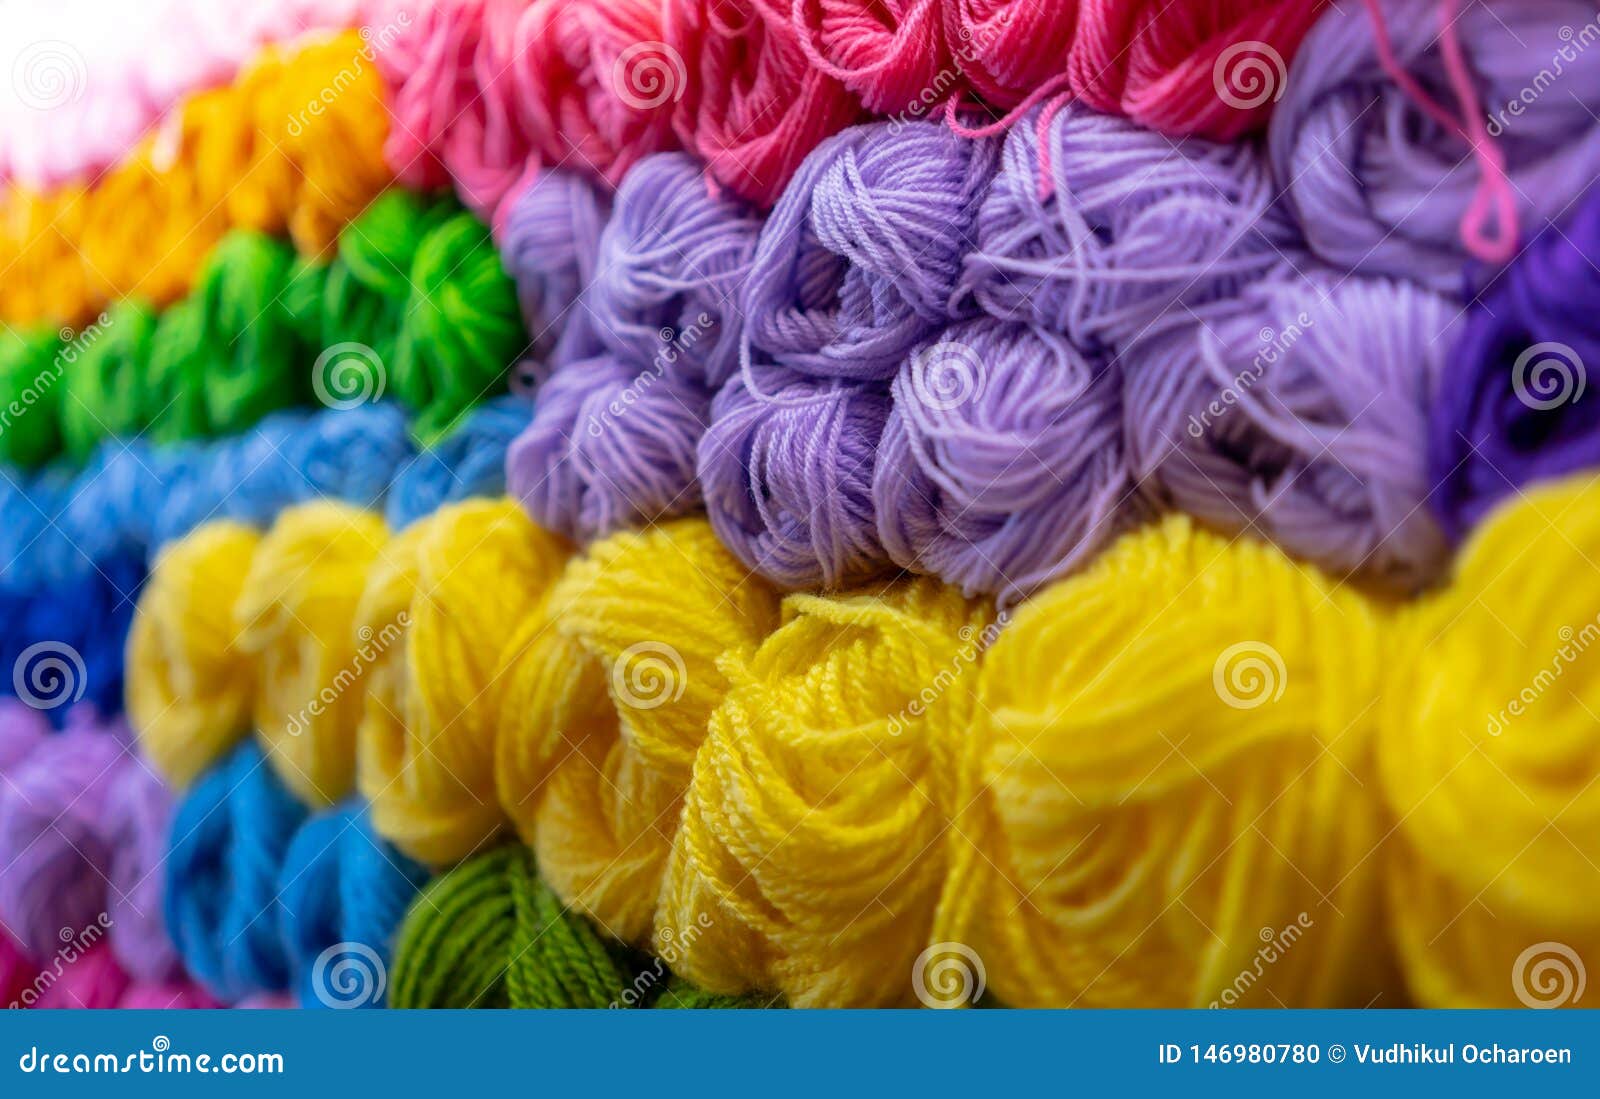 https://thumbs.dreamstime.com/z/colorful-big-thread-store-yarns-embroidering-different-color-threads-rows-146980780.jpg